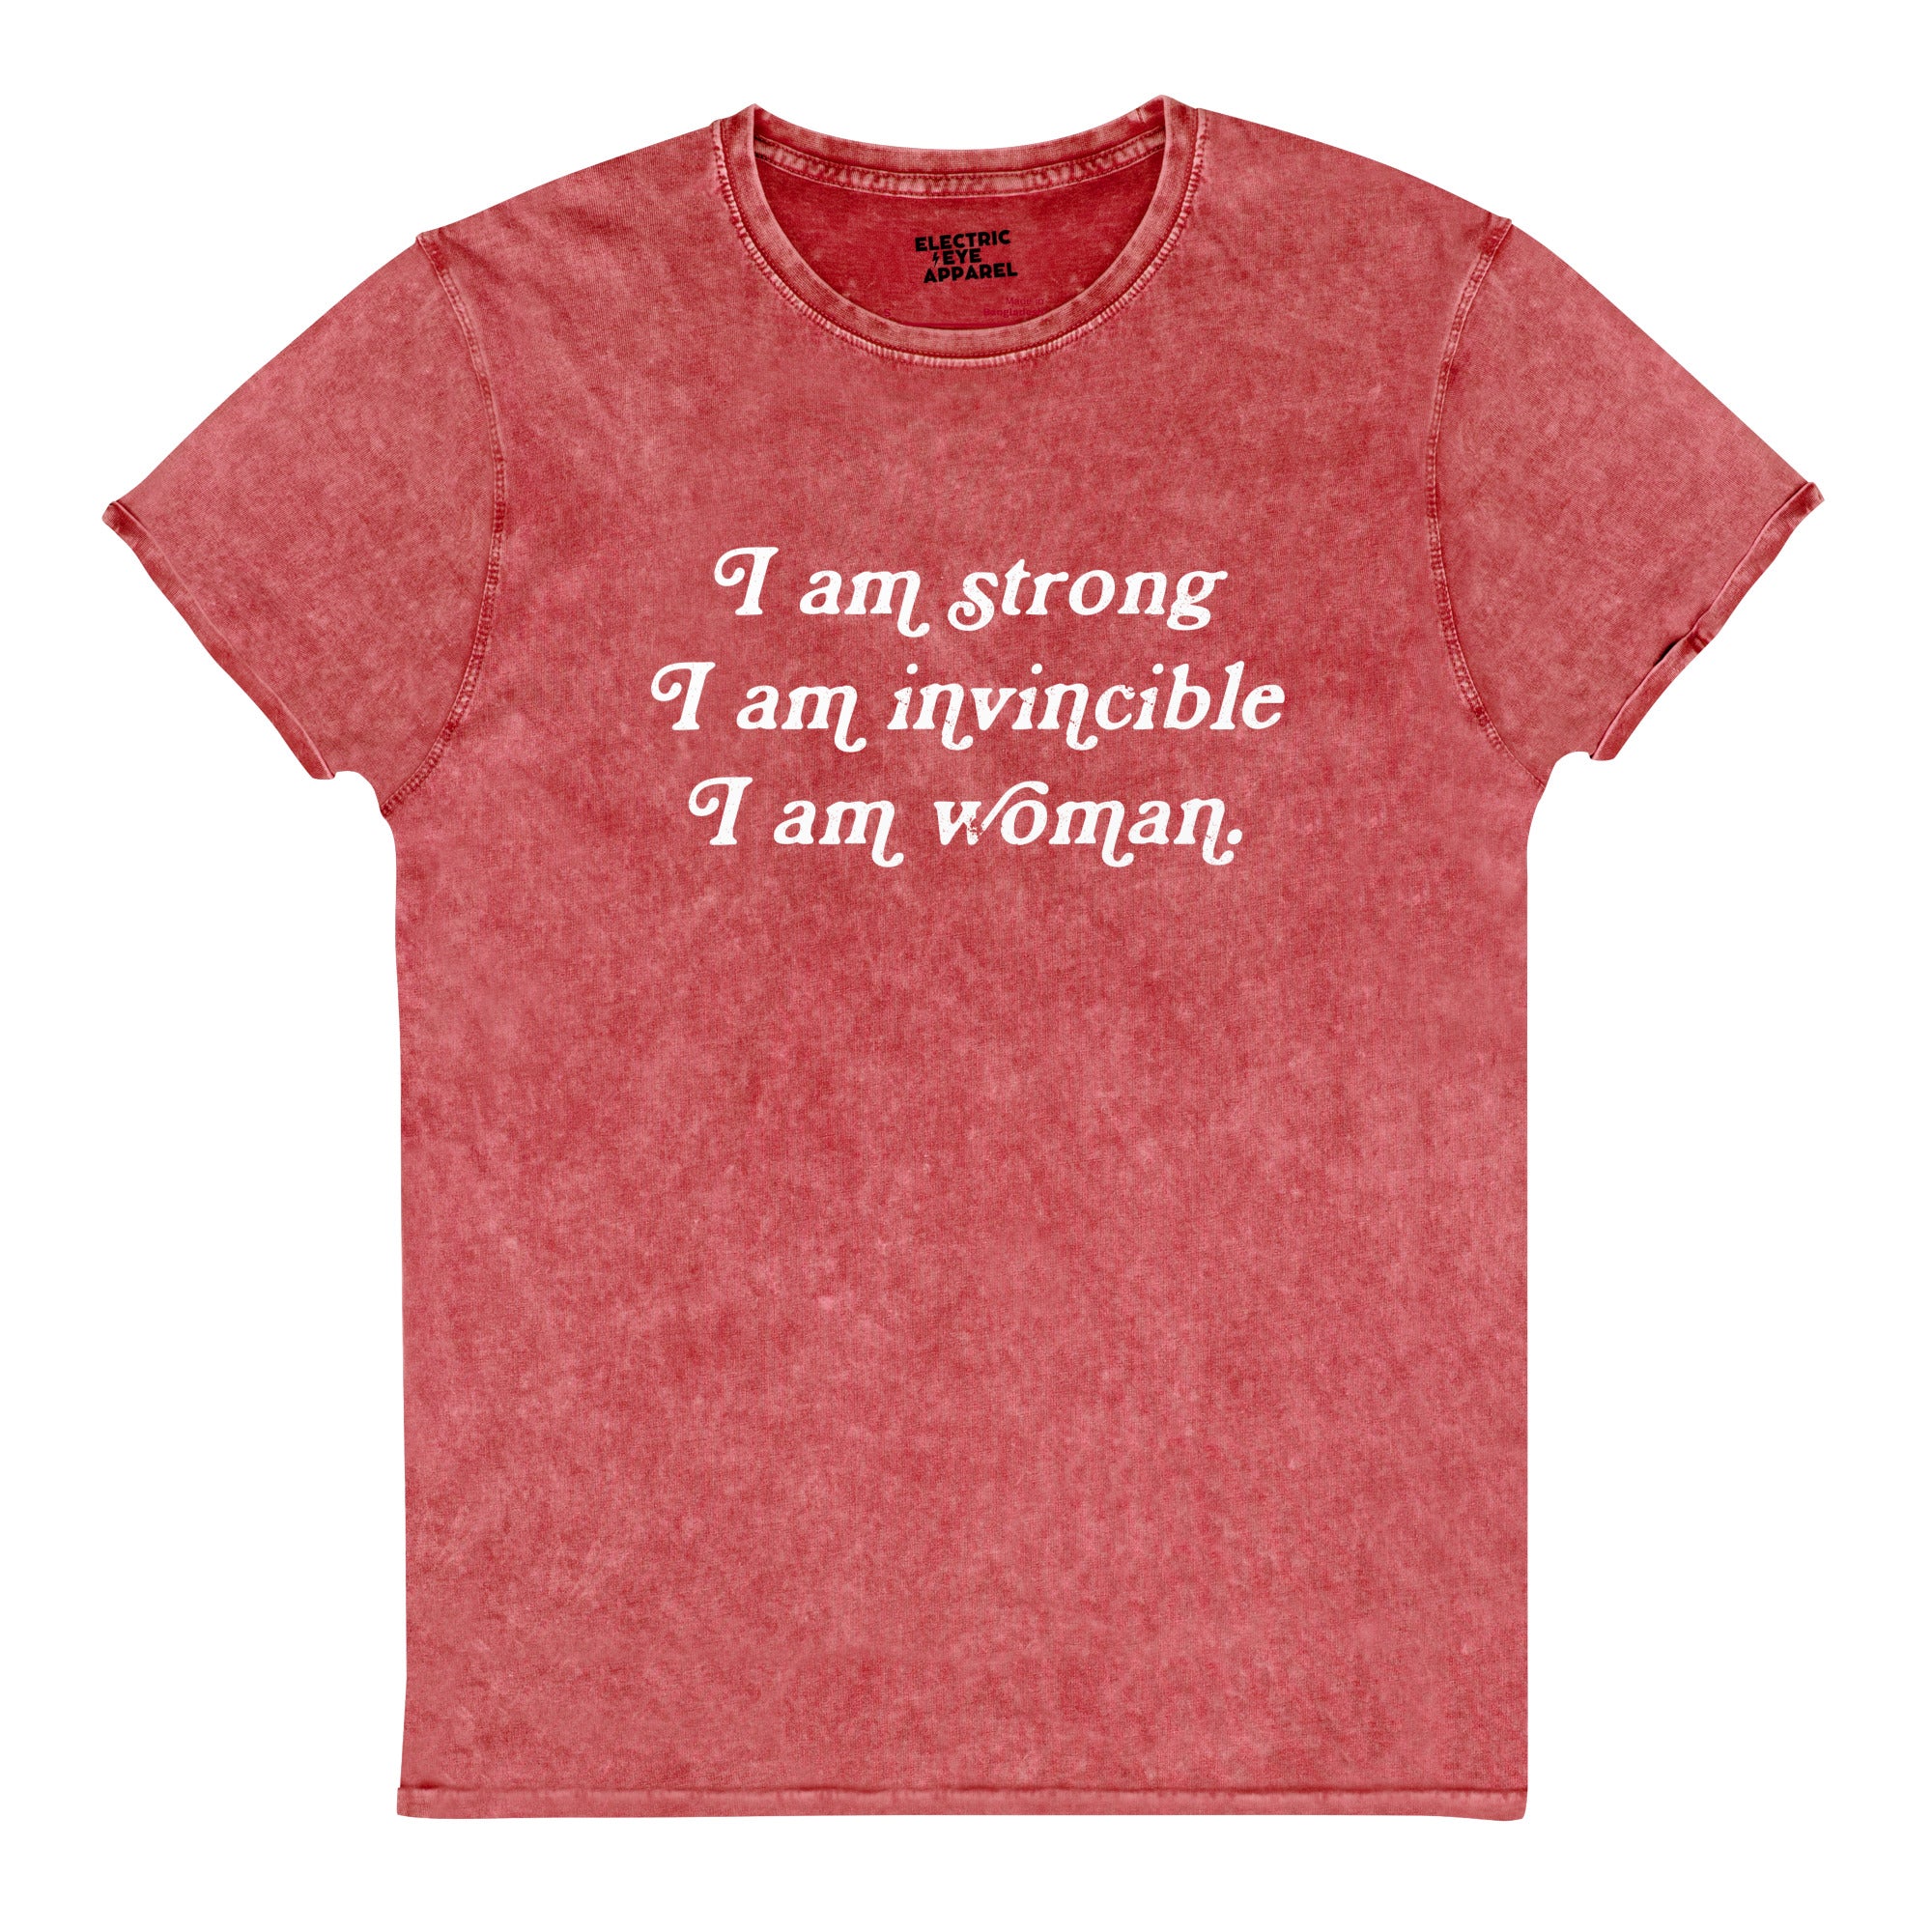 I Am Woman 70s Typography Premium Printed Vintage Aged T-Shirt - Inspired by Helen Reddy